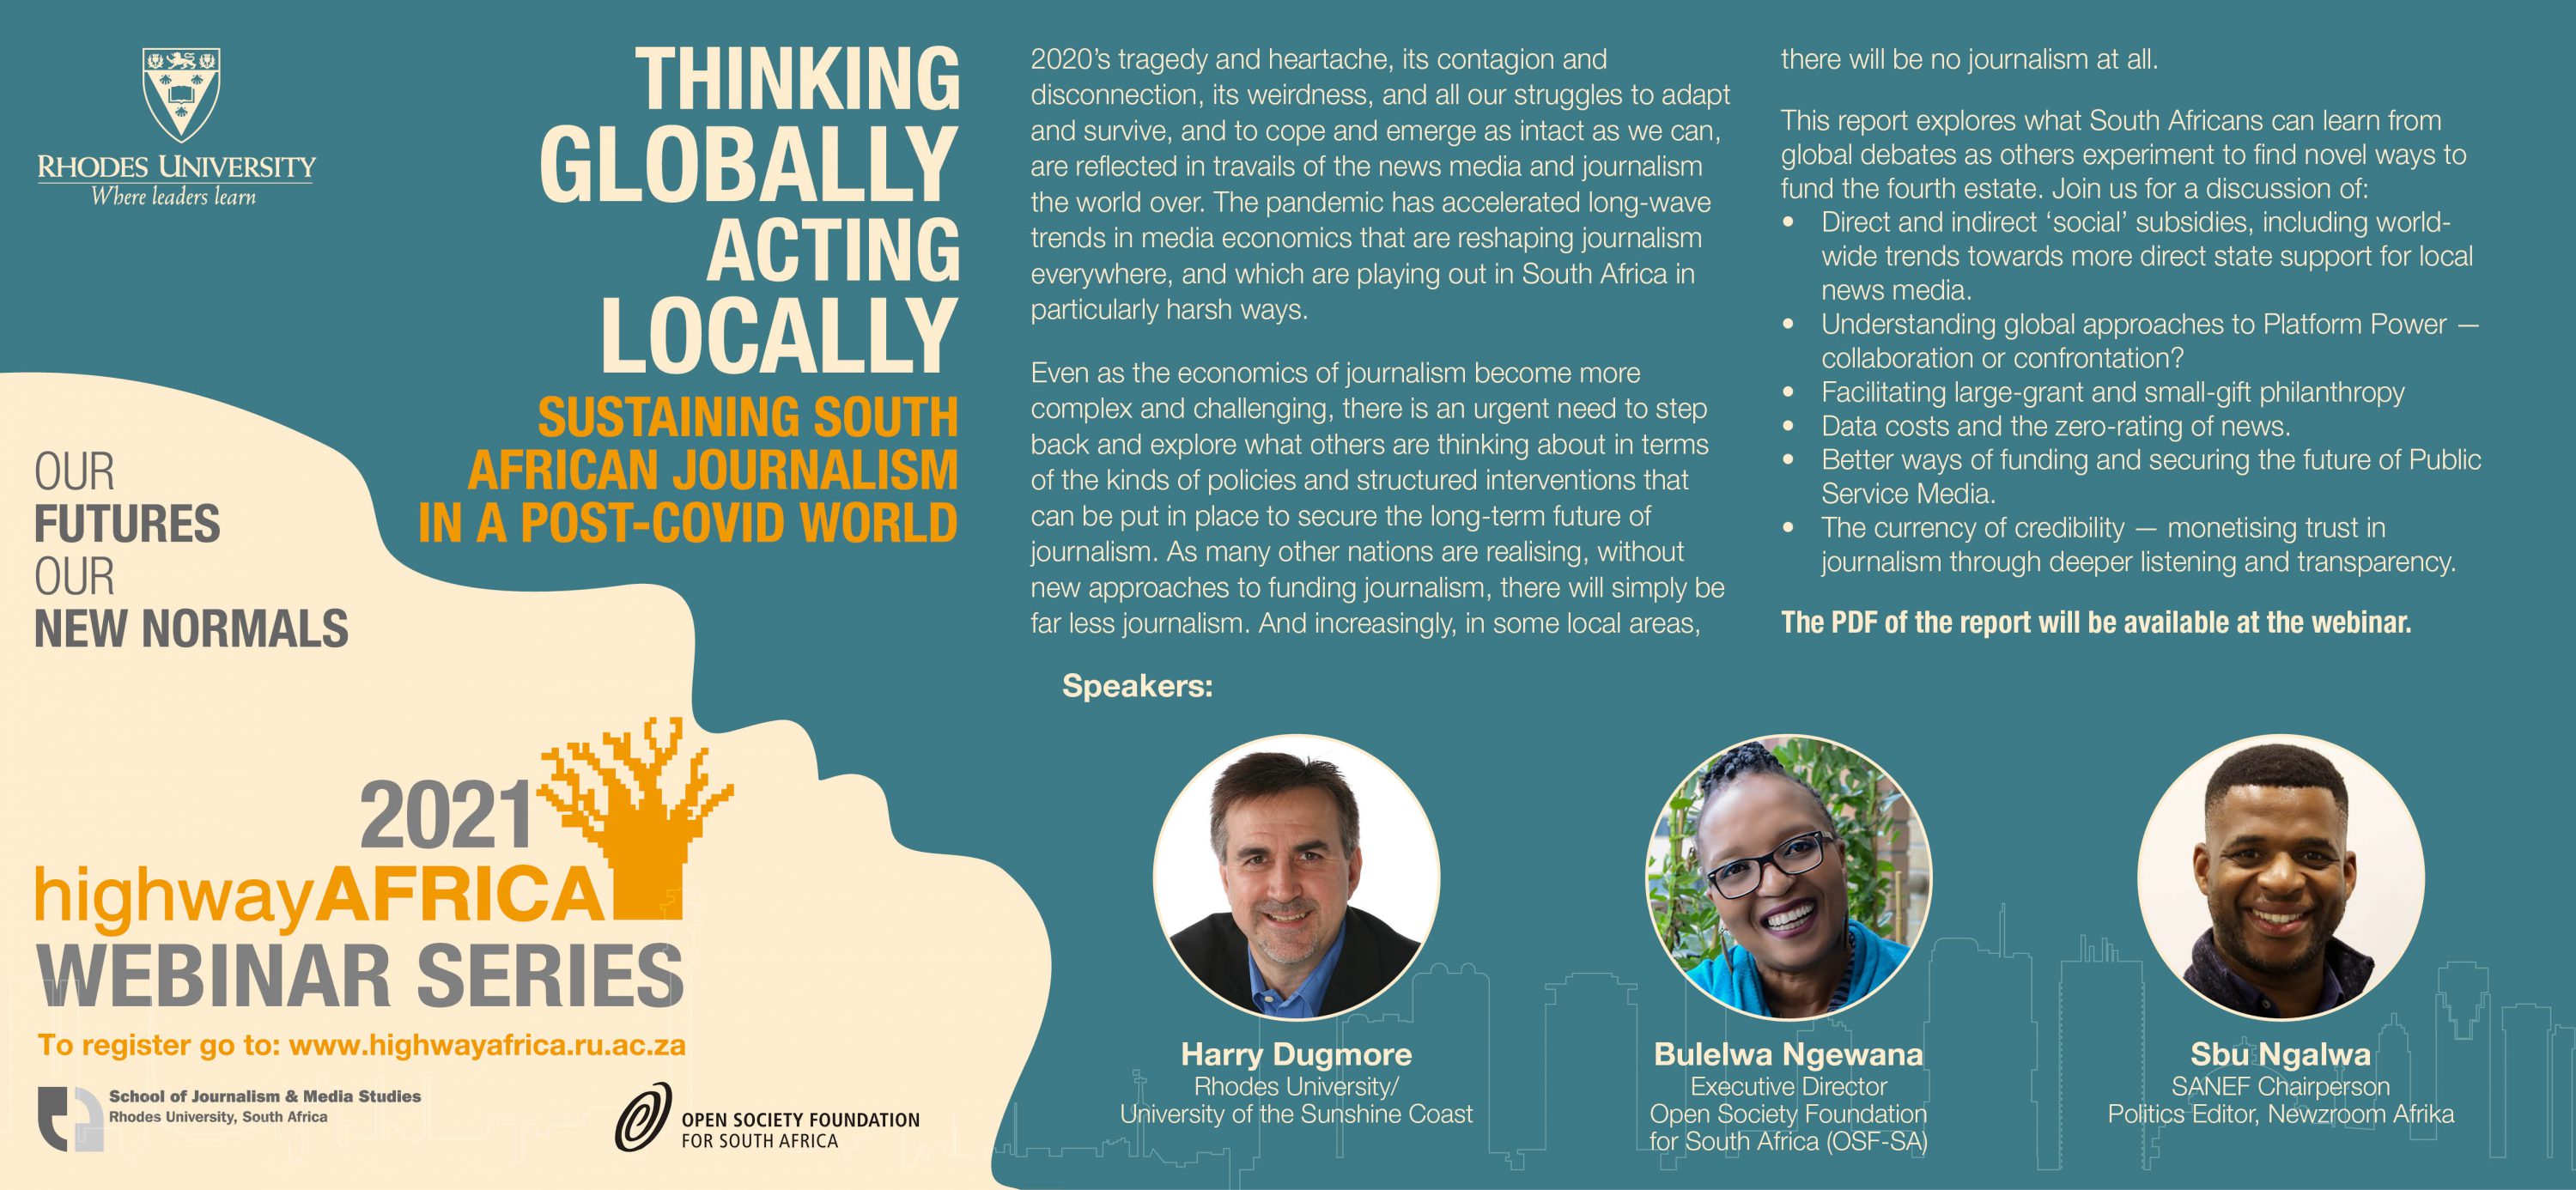 Thinking Globally, Acting Locally: Sustaining South African Journalism in a post-Covid World